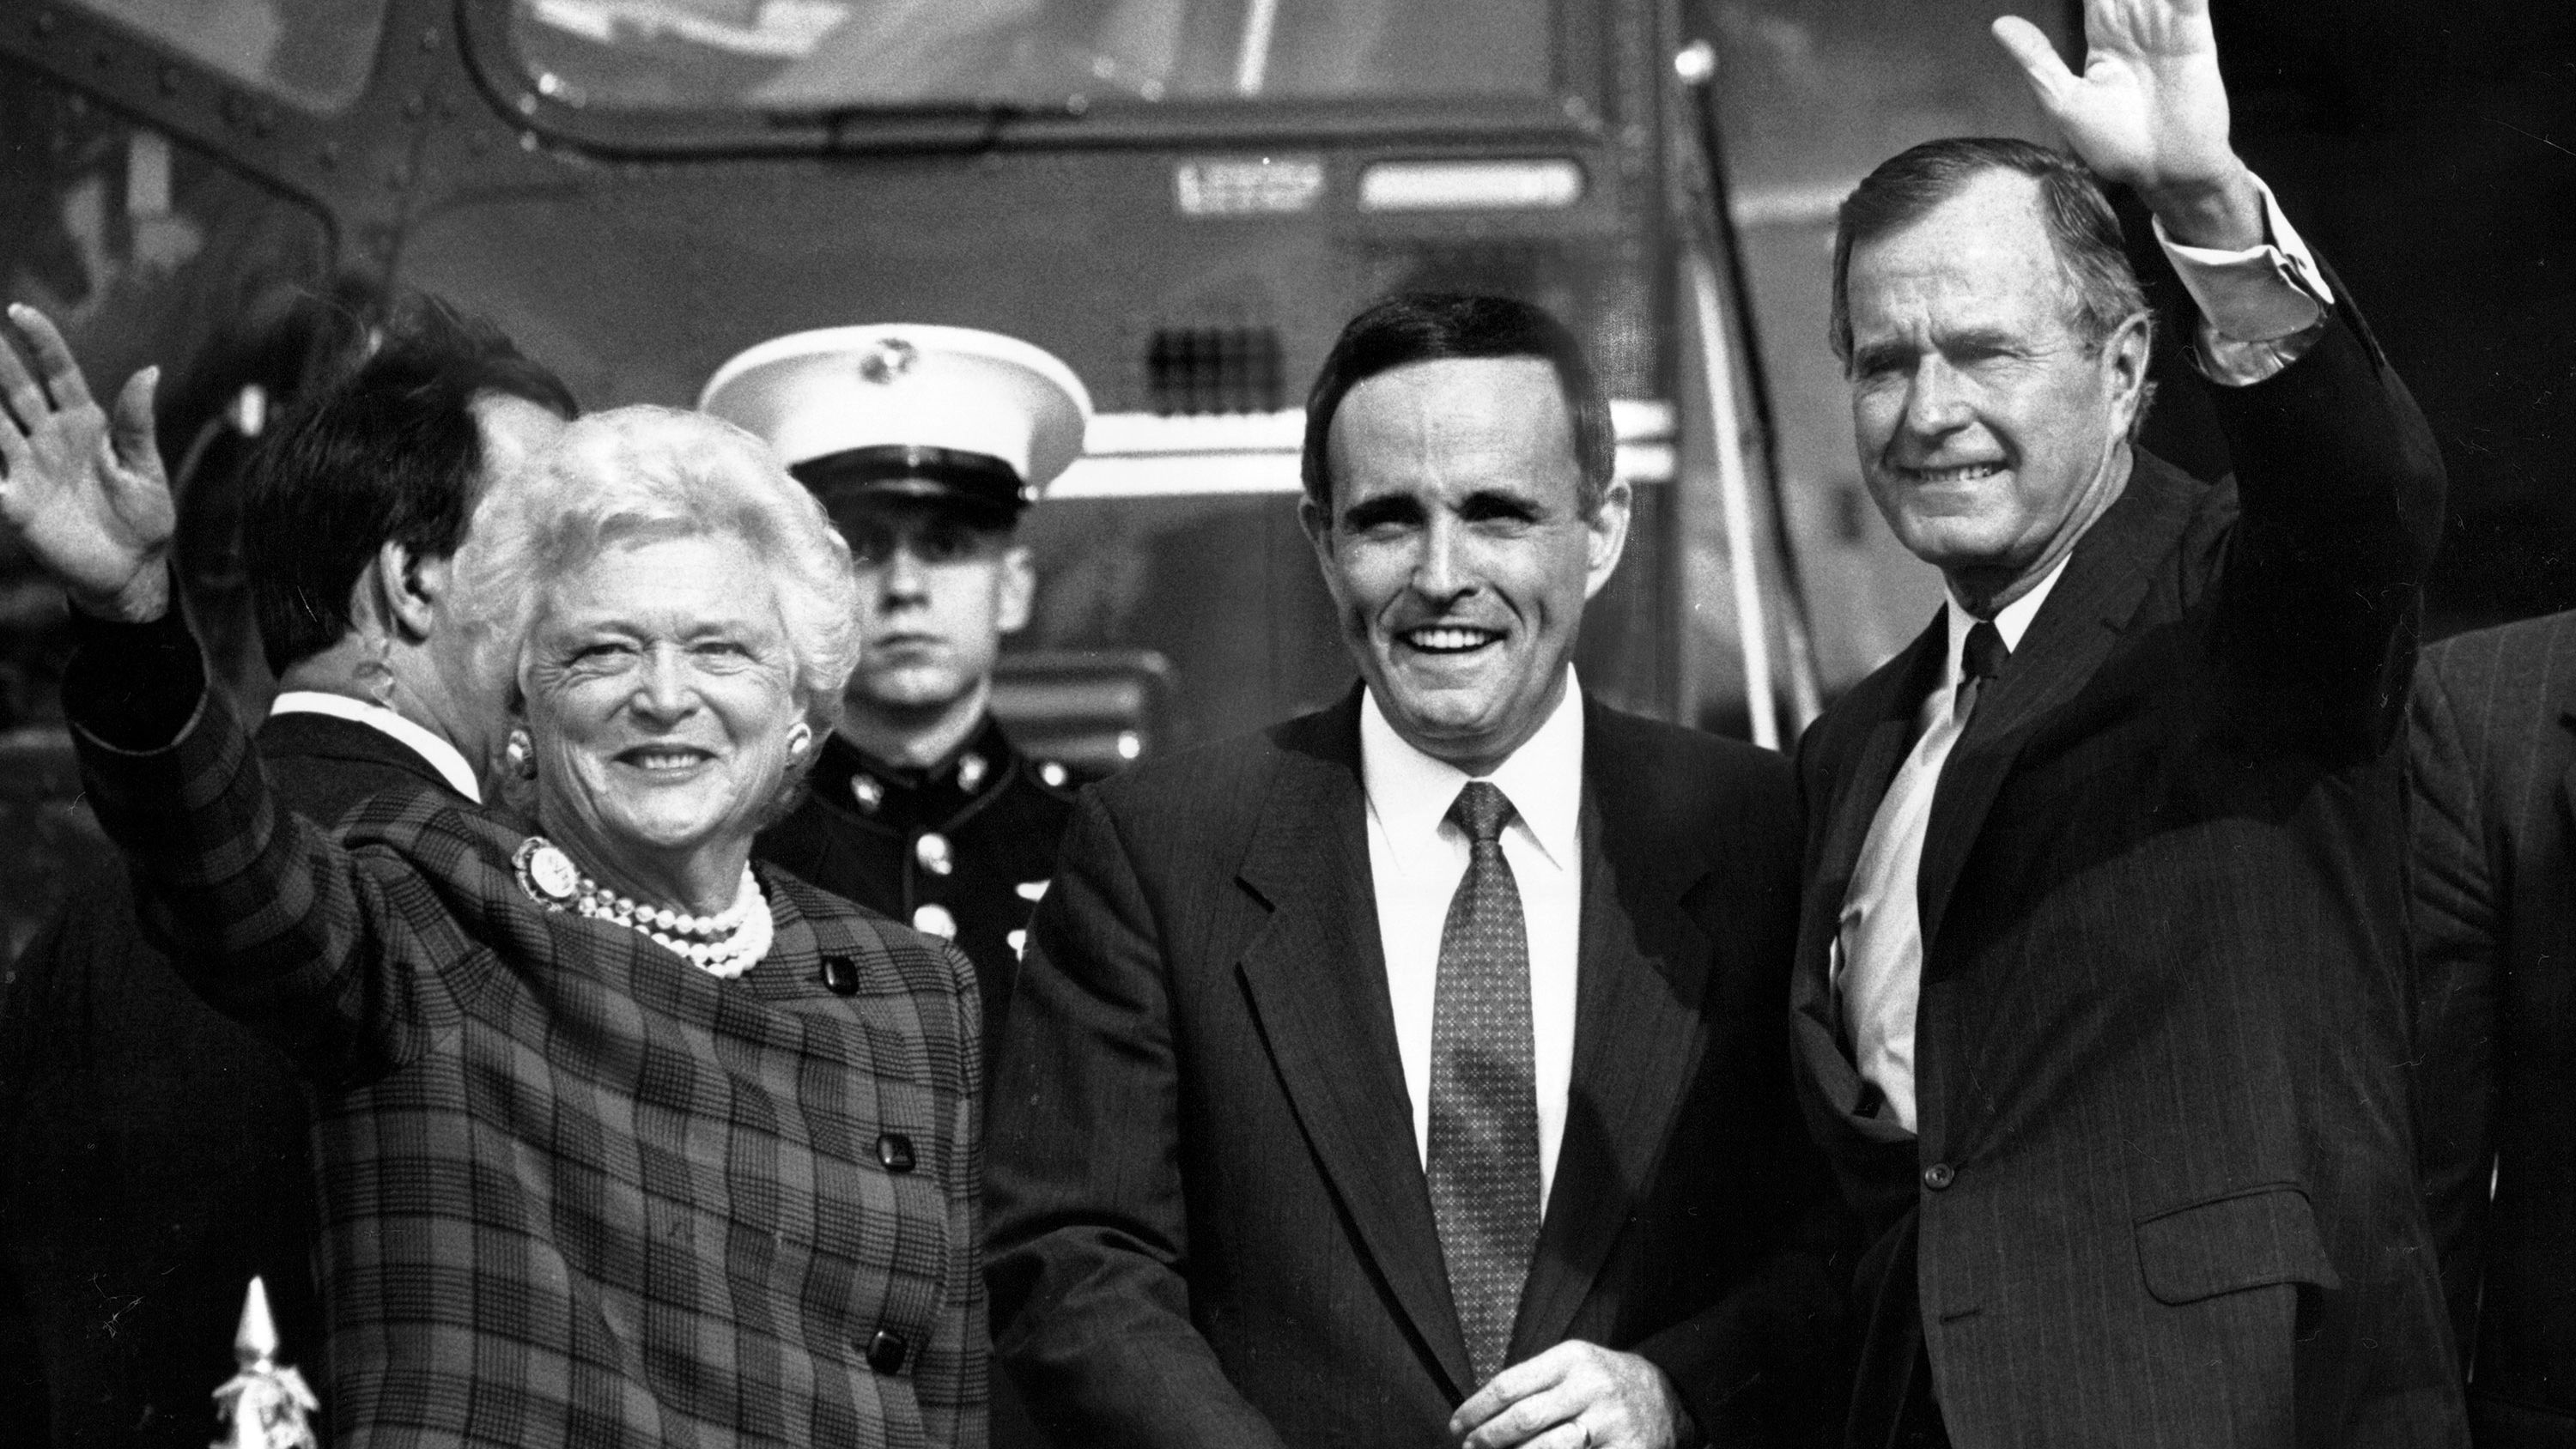 Giuliani greets US President George H.W. Bush and first lady Barbara Bush at a Wall Street heliport in September 1989. Giuliani, who had resigned as US attorney, was running for mayor of New York. He lost a close race to David Dinkins that year, but the two would face off again four years later.